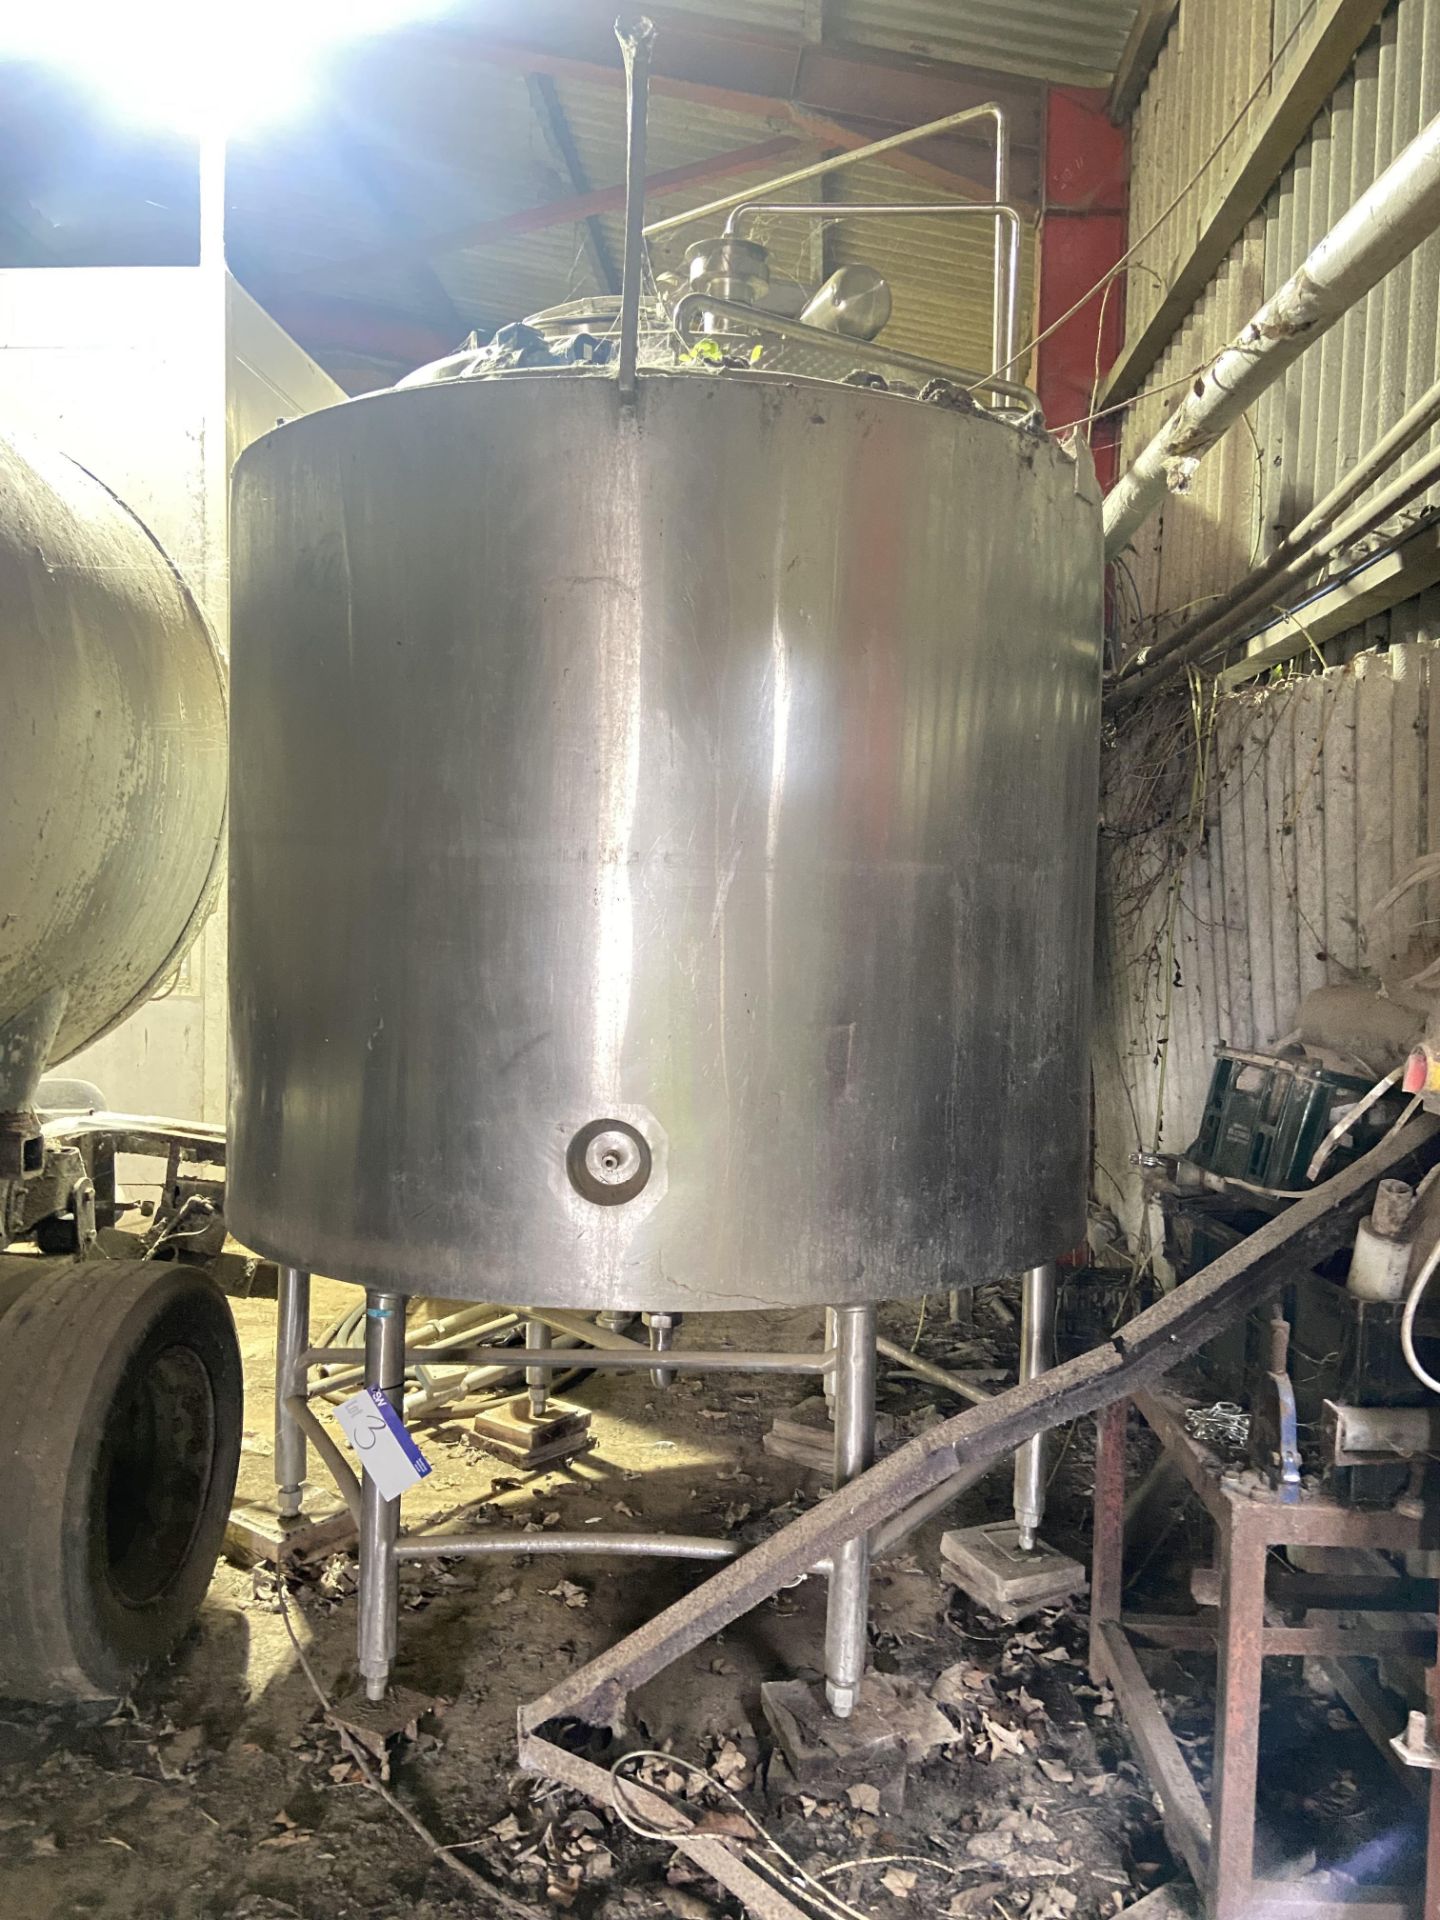 STAINLESS STEEL MIXING VESSEL, understood to be insulated, approx. 2m dia. x 1.6m deep, with - Image 2 of 4